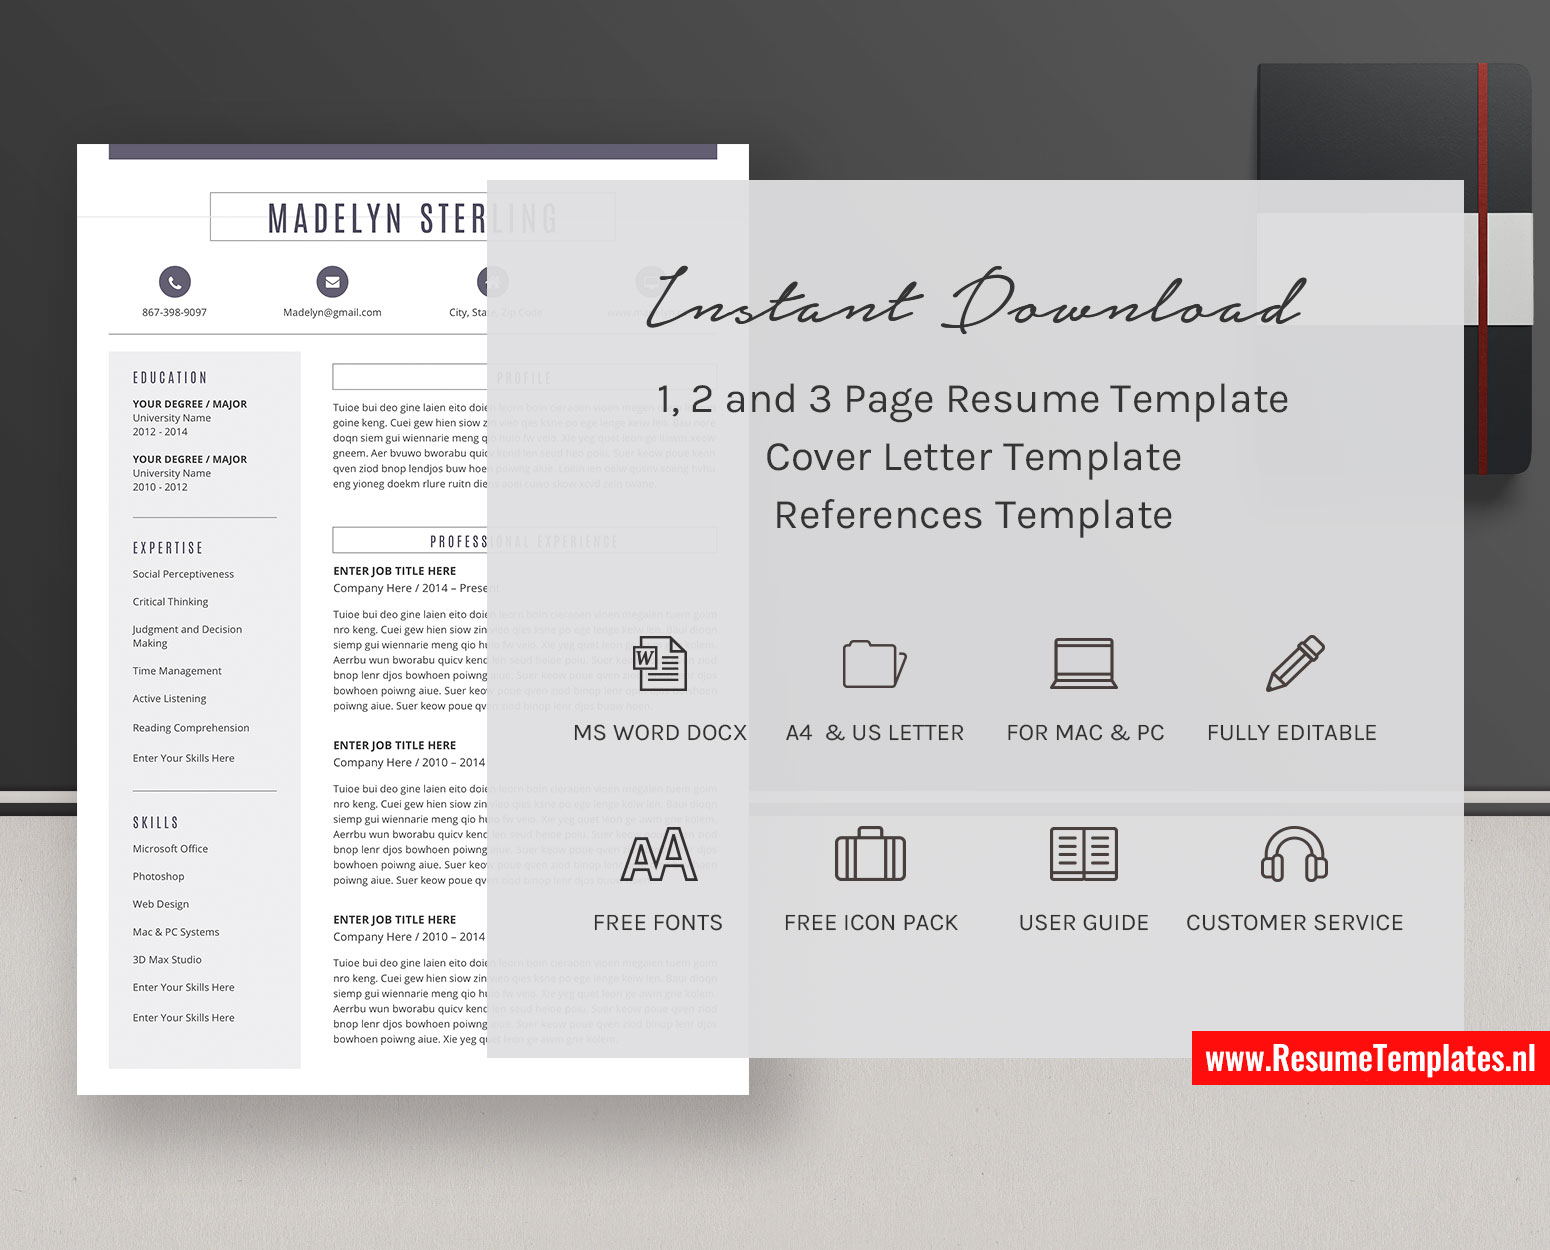 Ms Office Template Resume from www.resumetemplates.nl